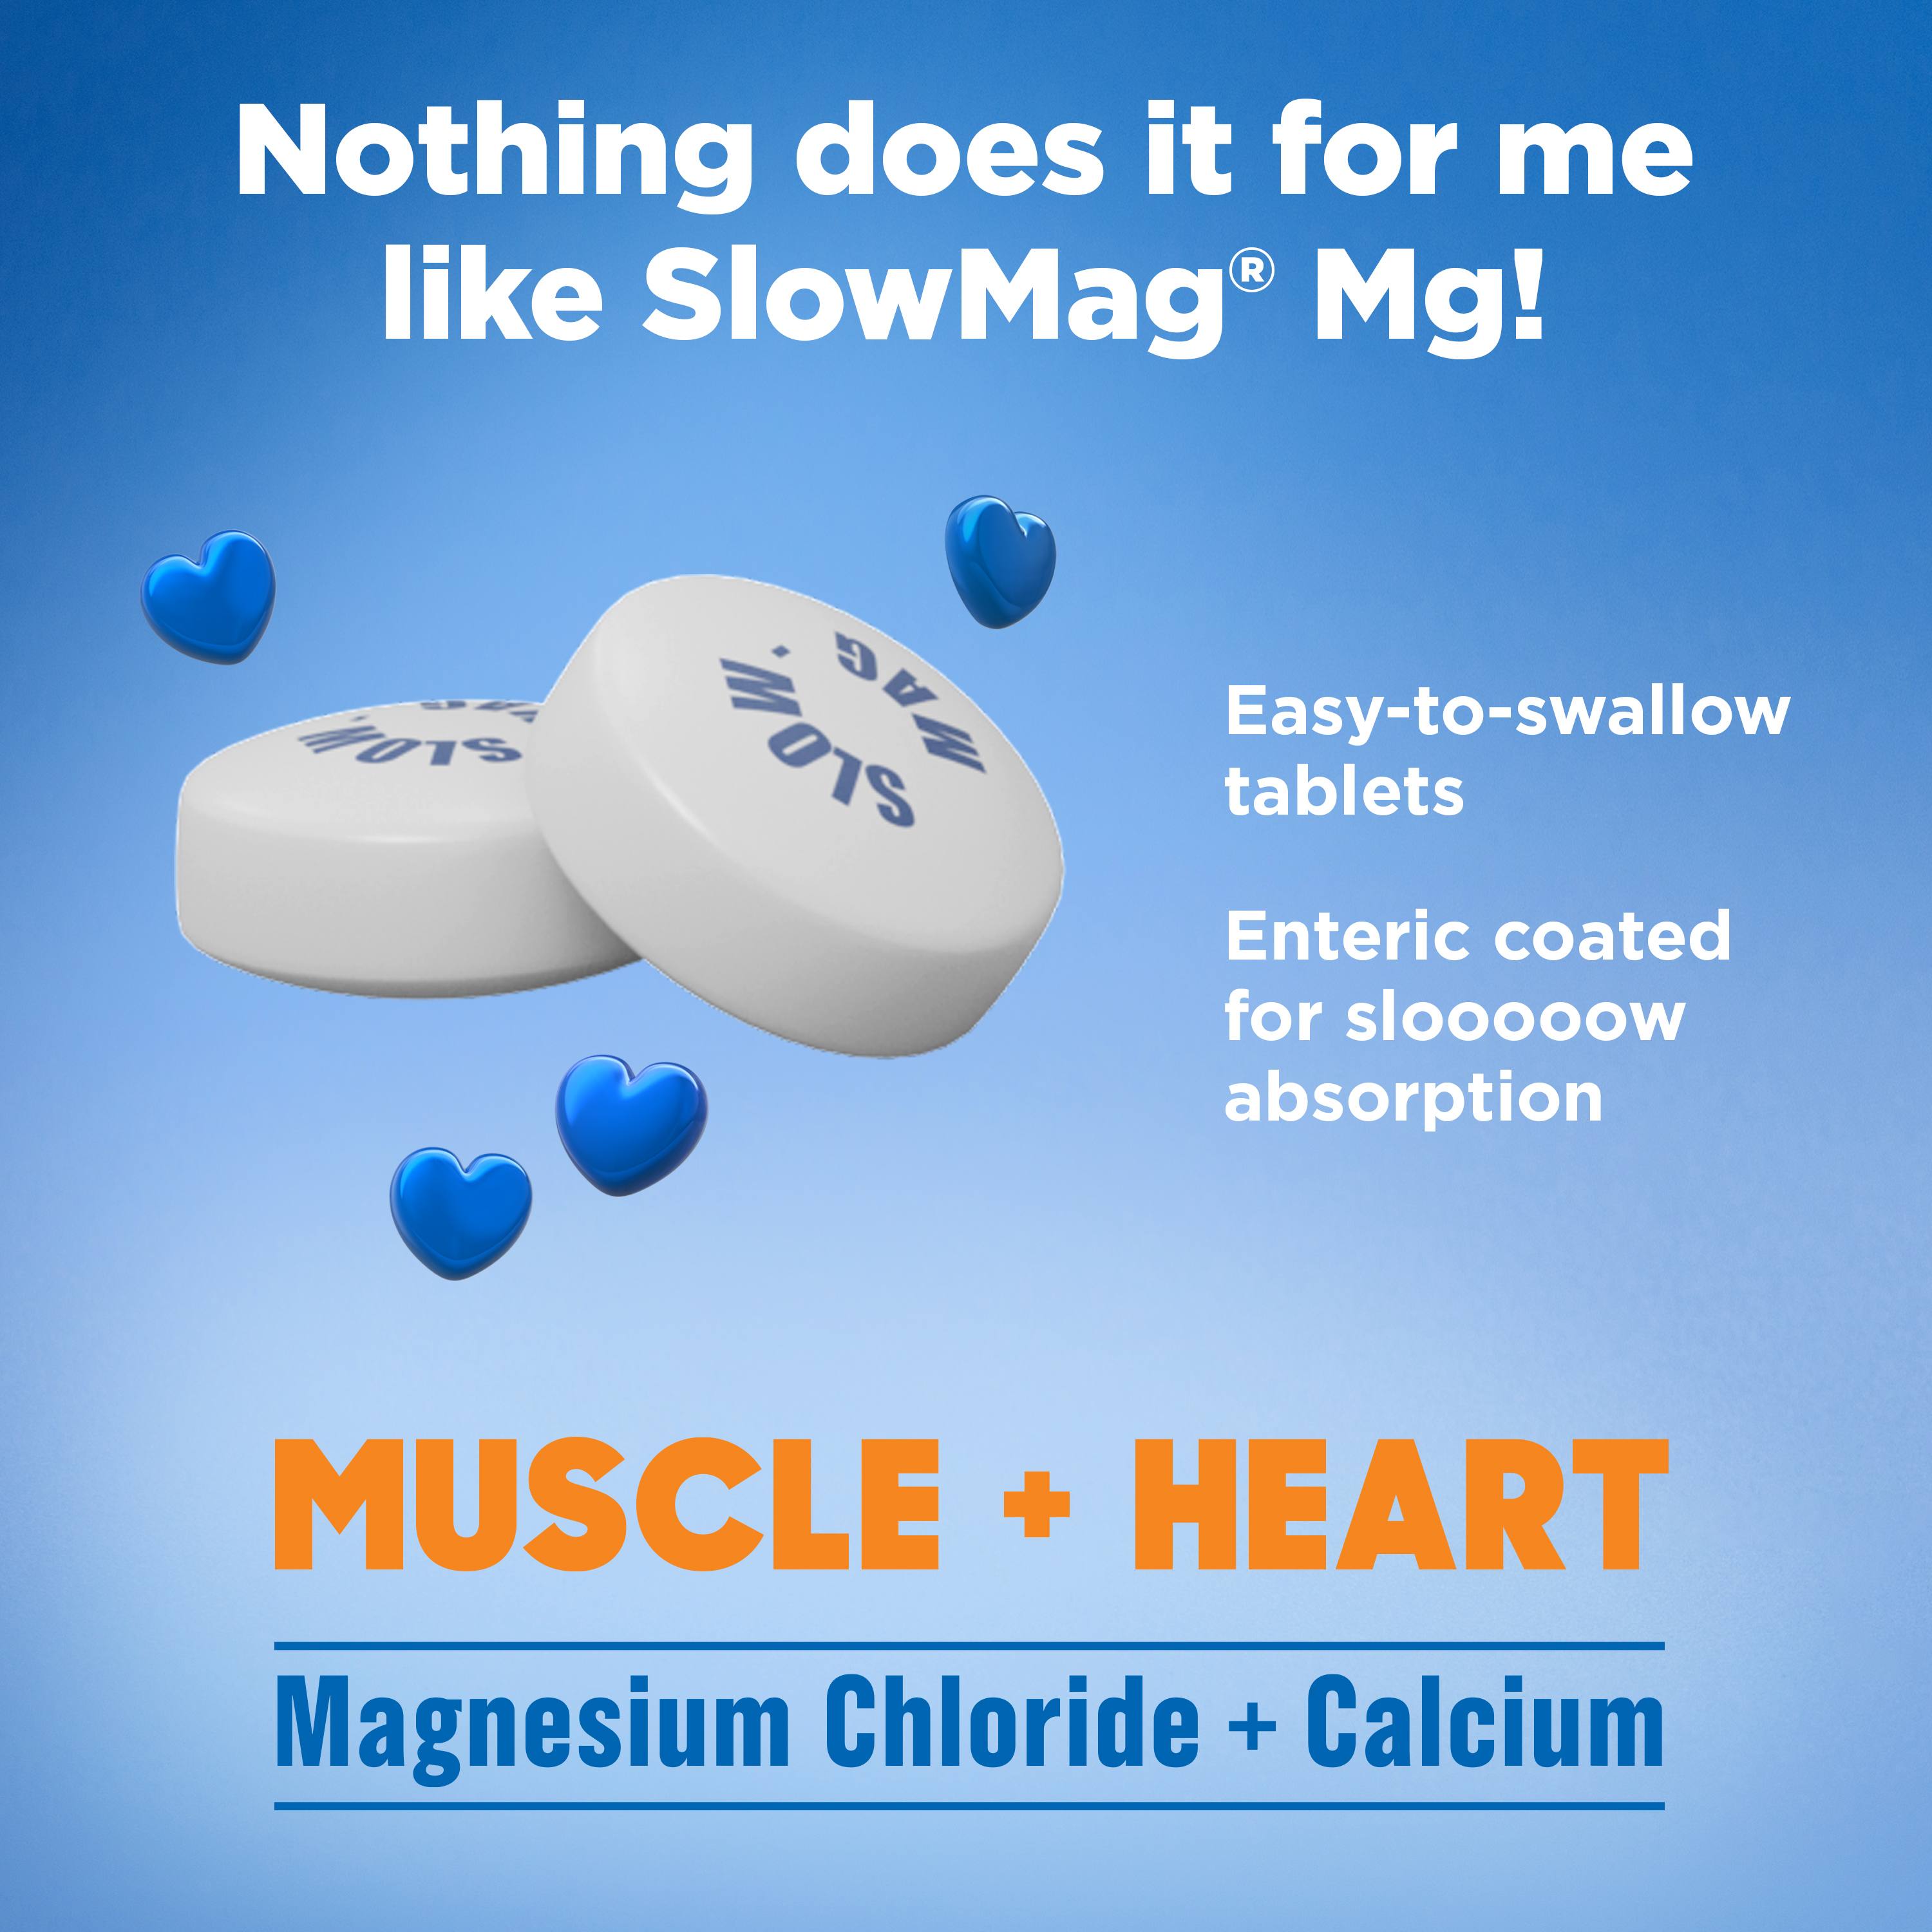 SlowMag® Mg Muscle + Heart Magnesium Chloride Supplement Tablets with Calcium 60ct - image 5 of 12